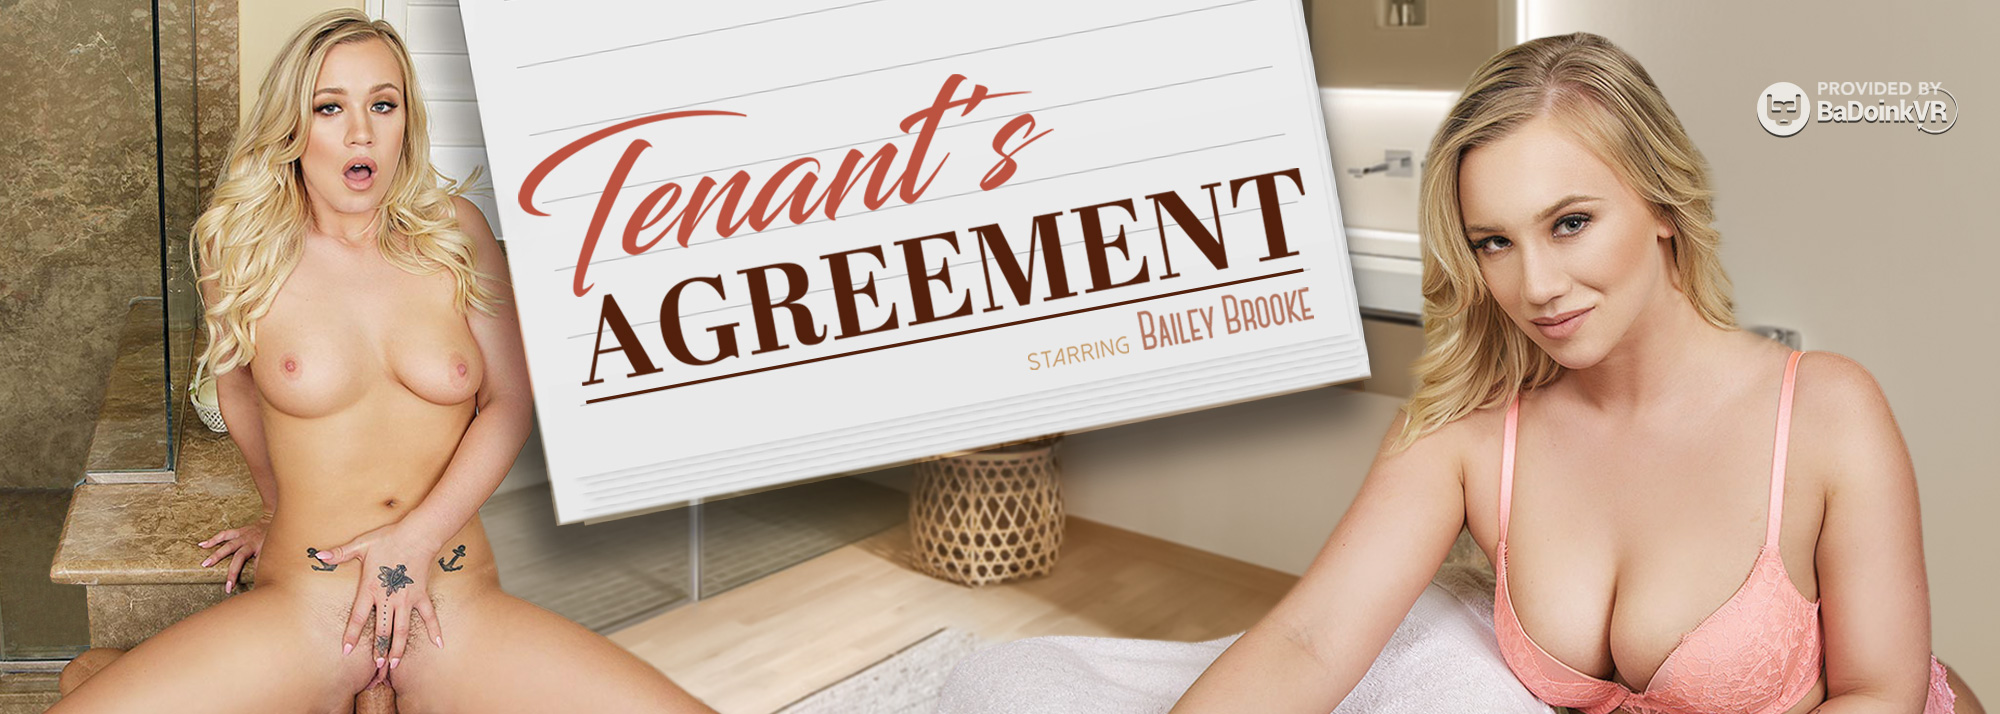 Tenant's Agreement with Bailey Brooke  Slideshow